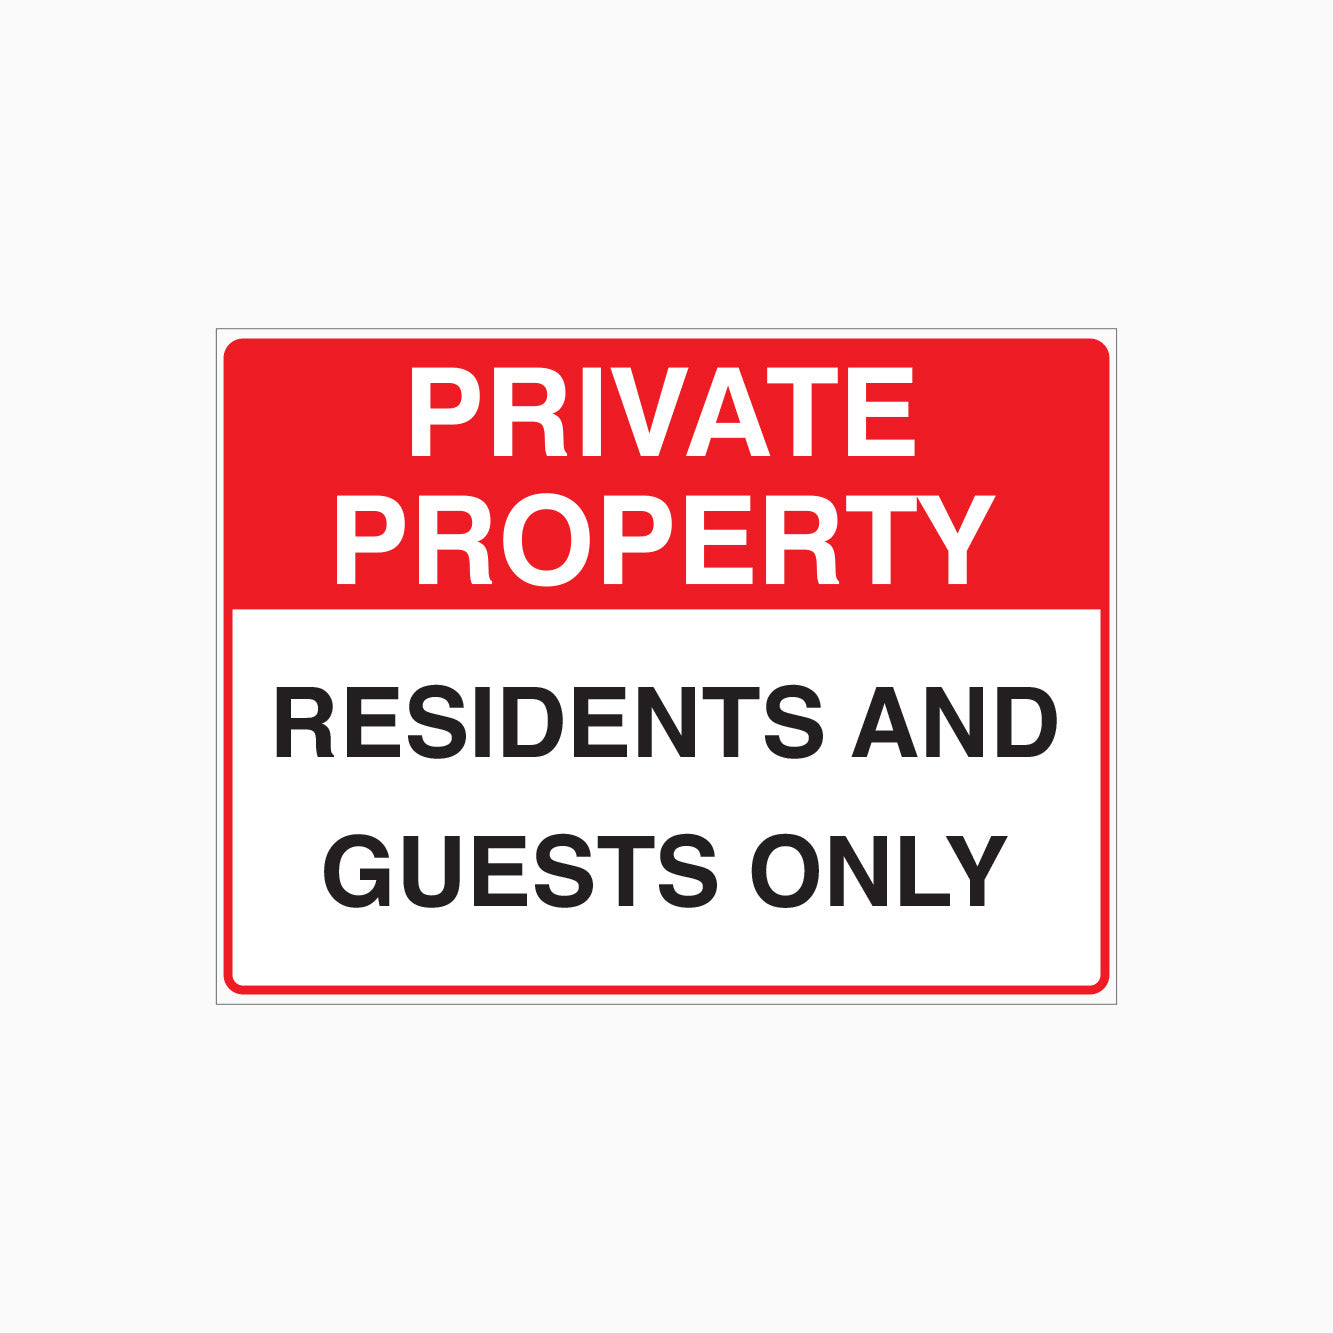 PRIVATE PROPERTY SIGN - RESIDENTS AND GUESTS ONLY SIGN